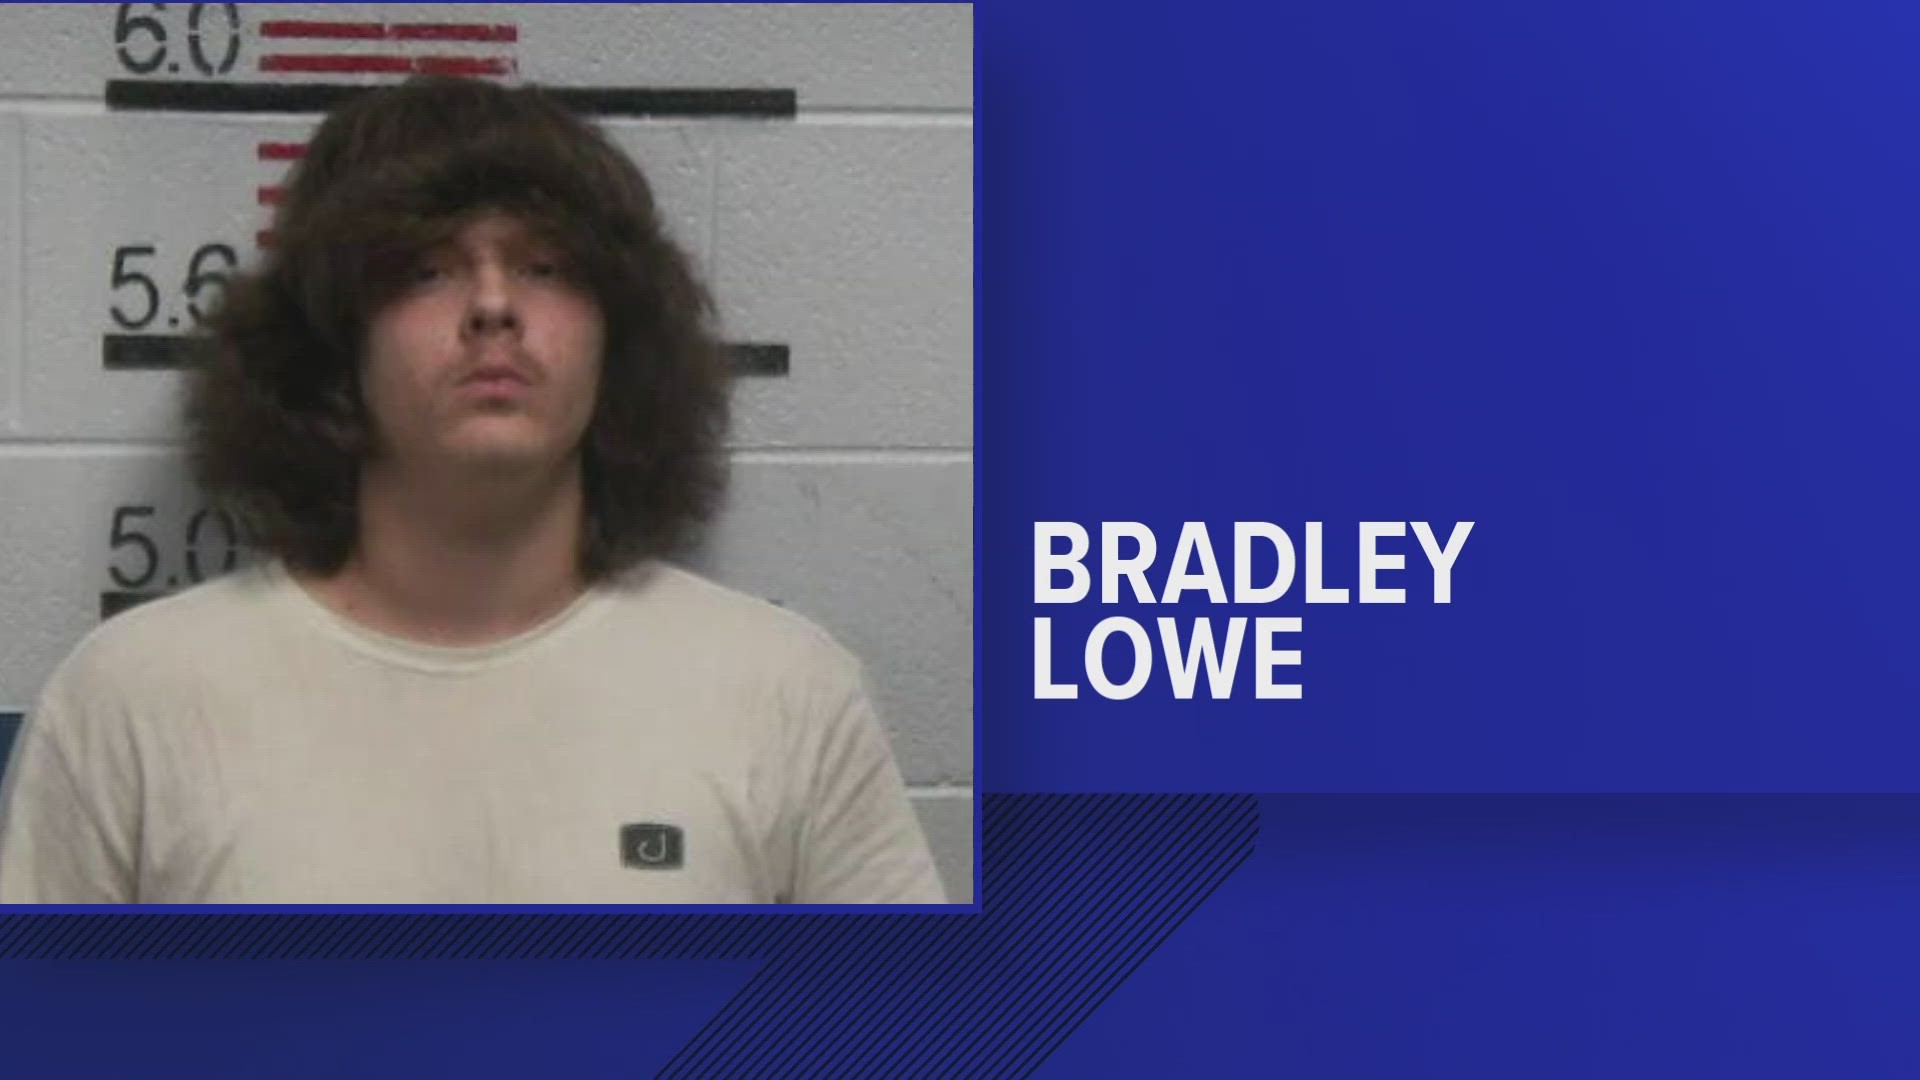 The Scott County Sheriff's Office said that Bradley Isaiah Lowe, 19, from Lancing, is being held on a $50,000 bond.